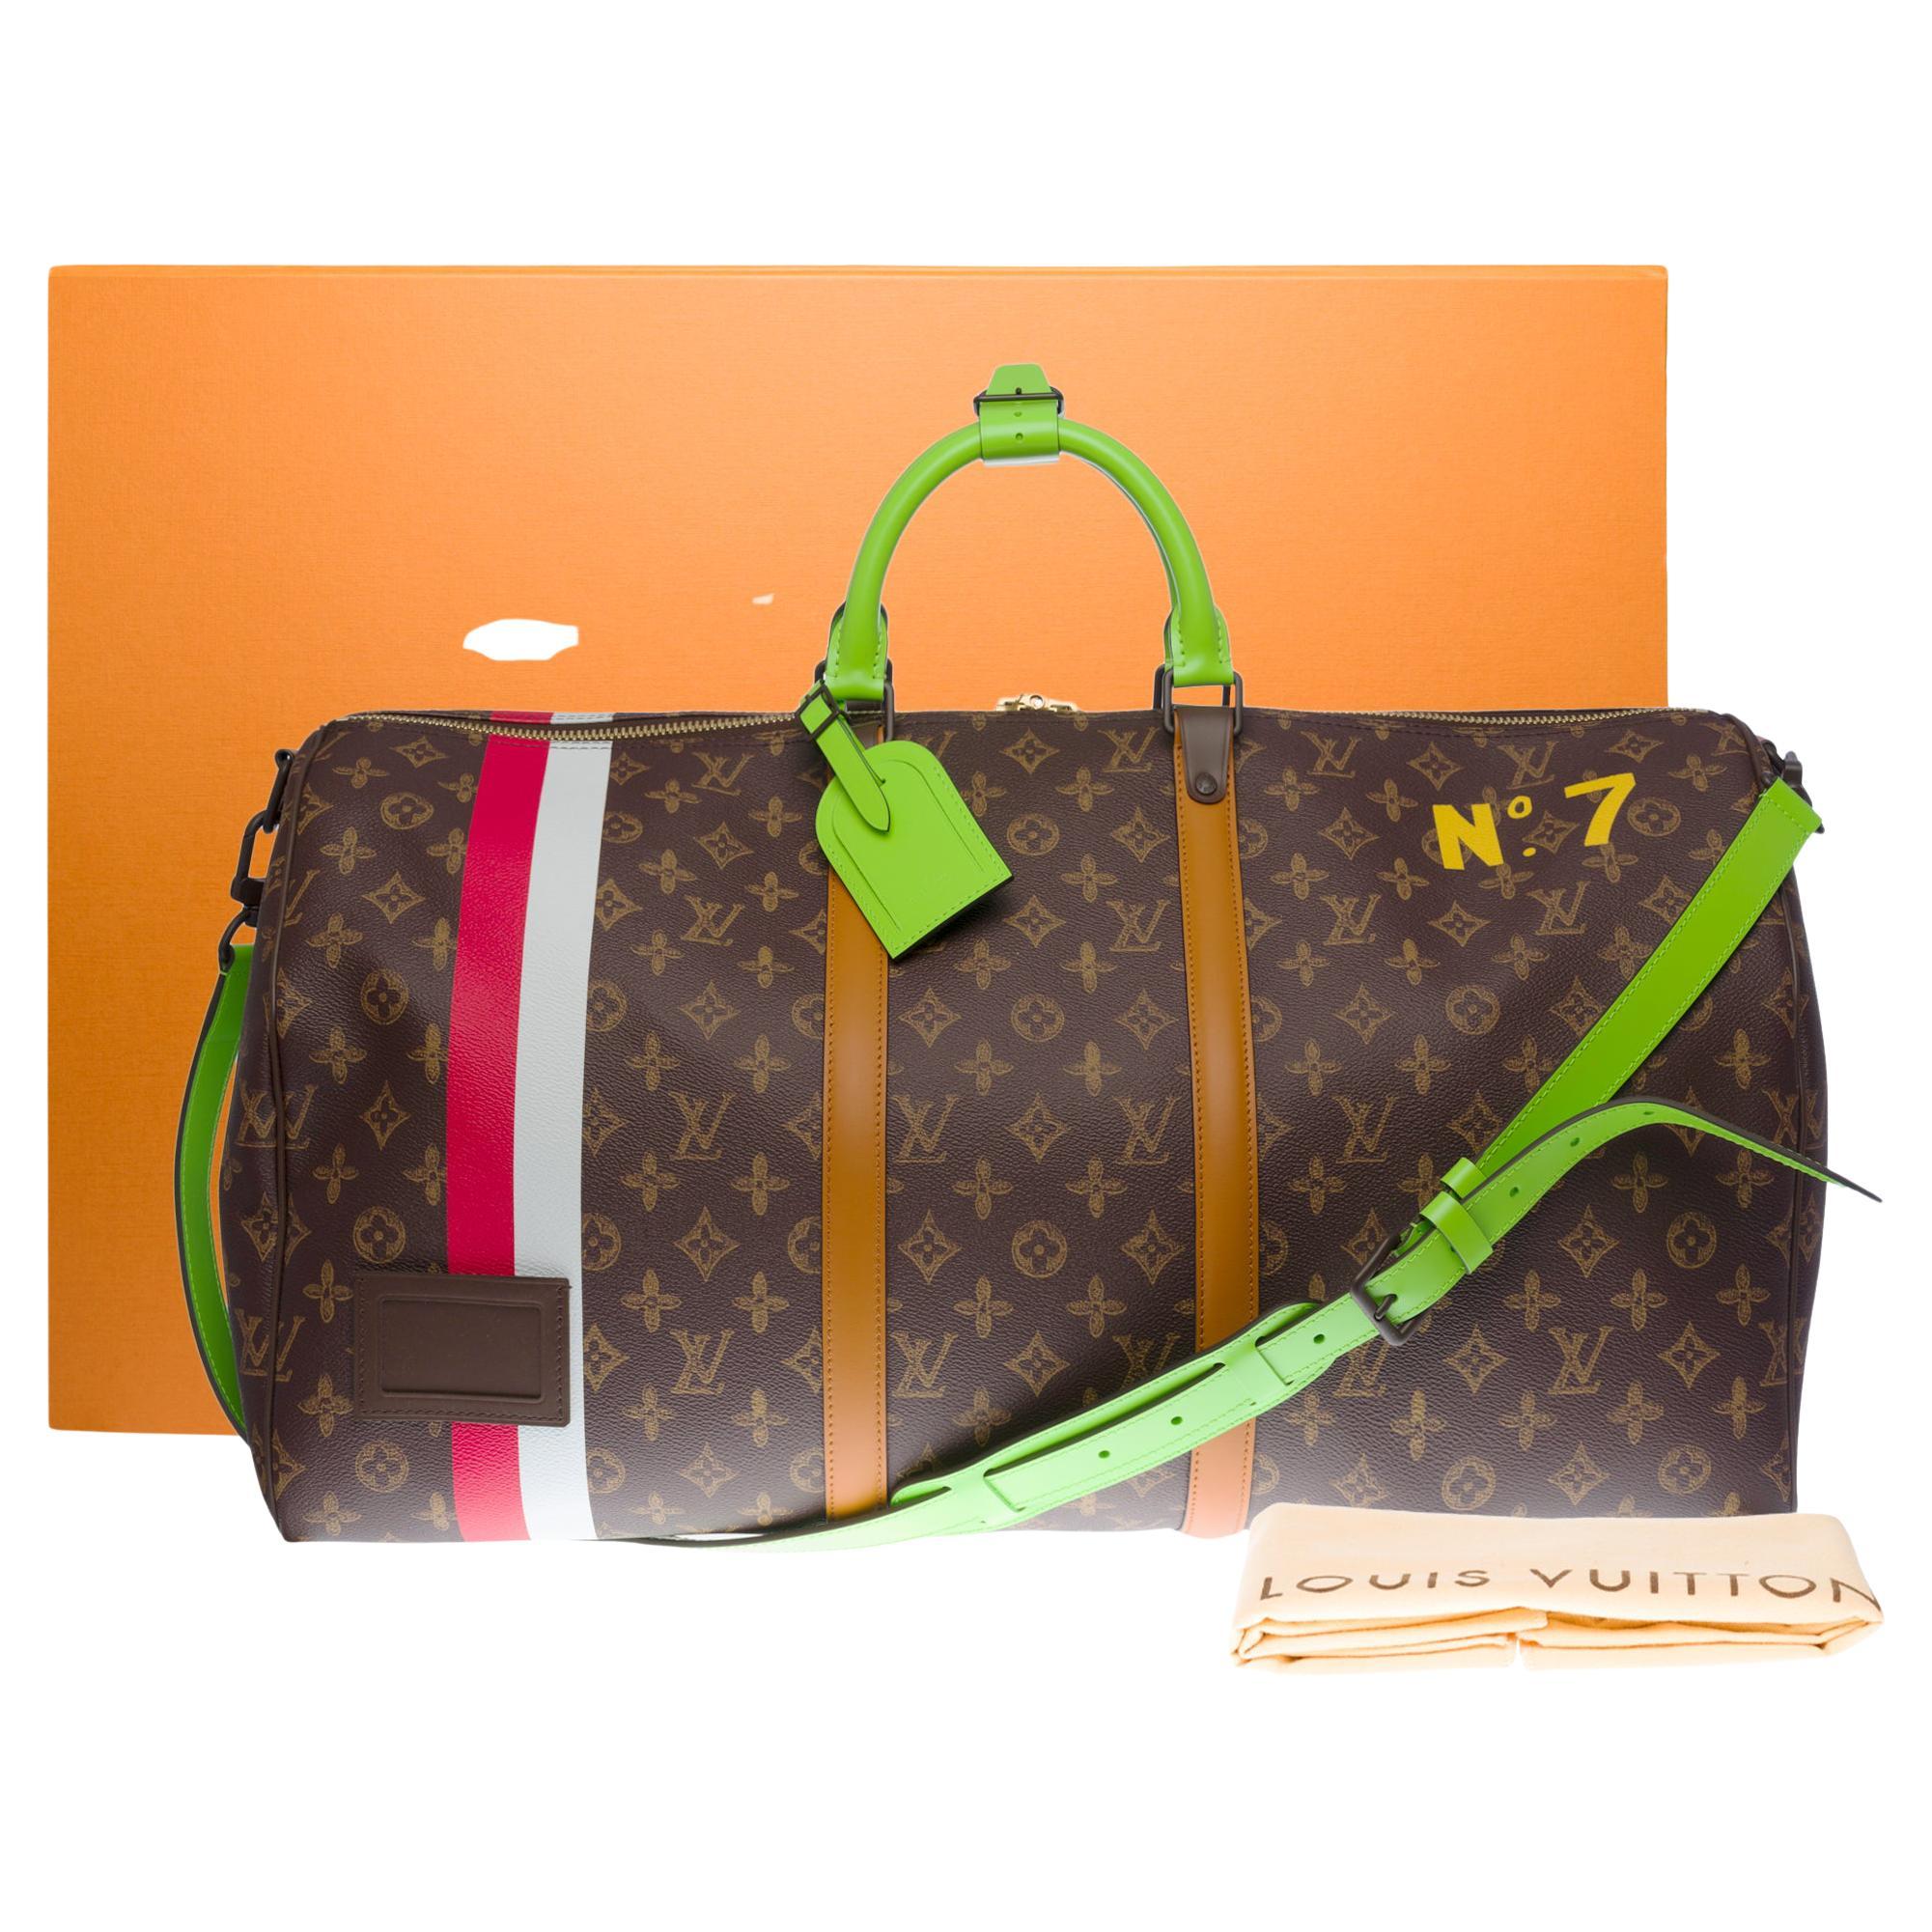 The Louis Vuitton Keepall 55 Is the Investment Luggage I've Been